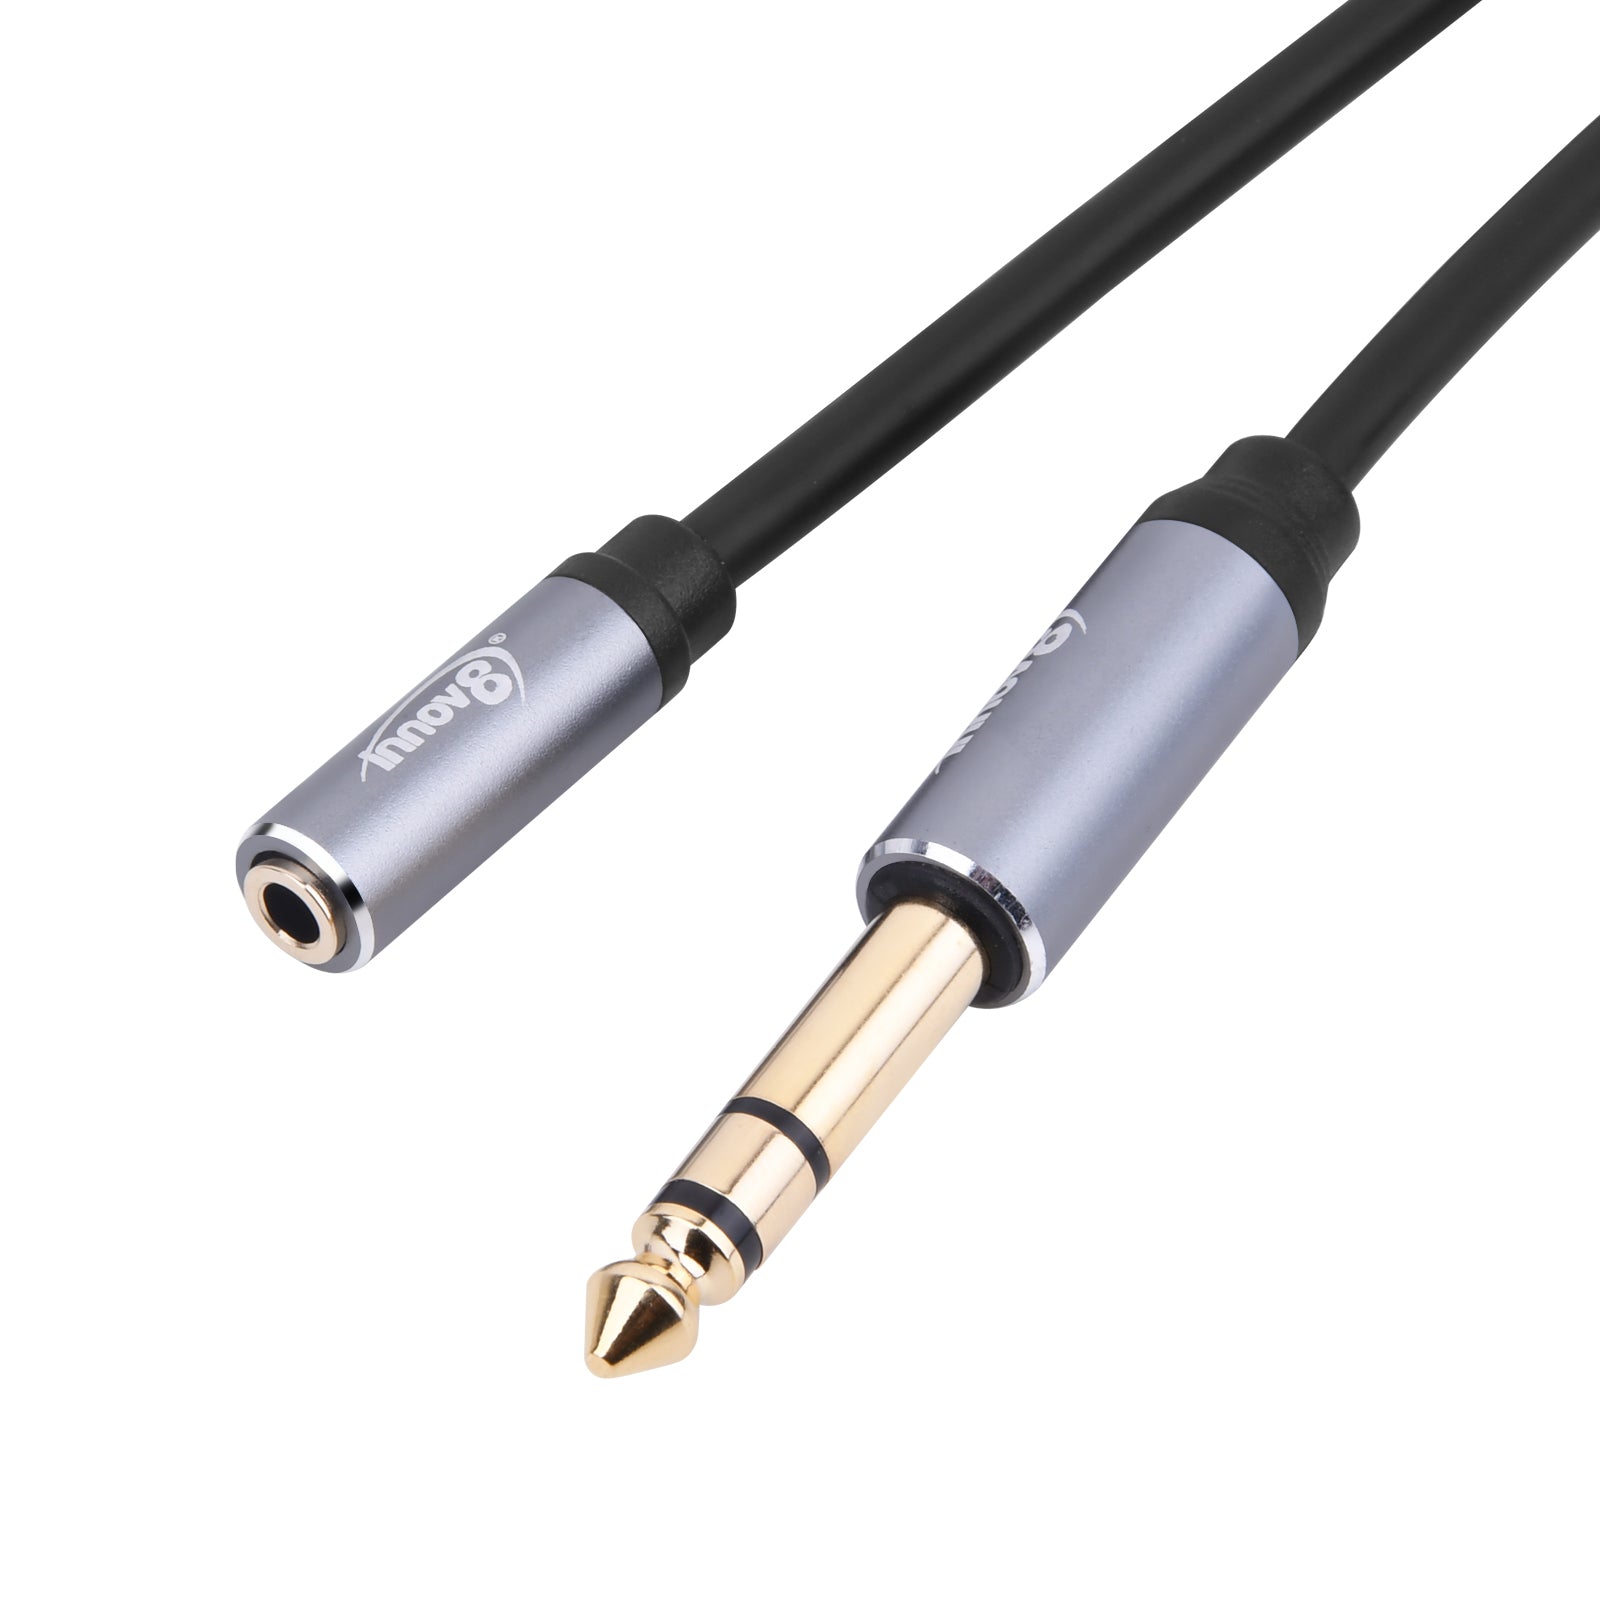 6.35mm Male TRS to 3.5mm Female Headphone Adapter Cable 1.8m